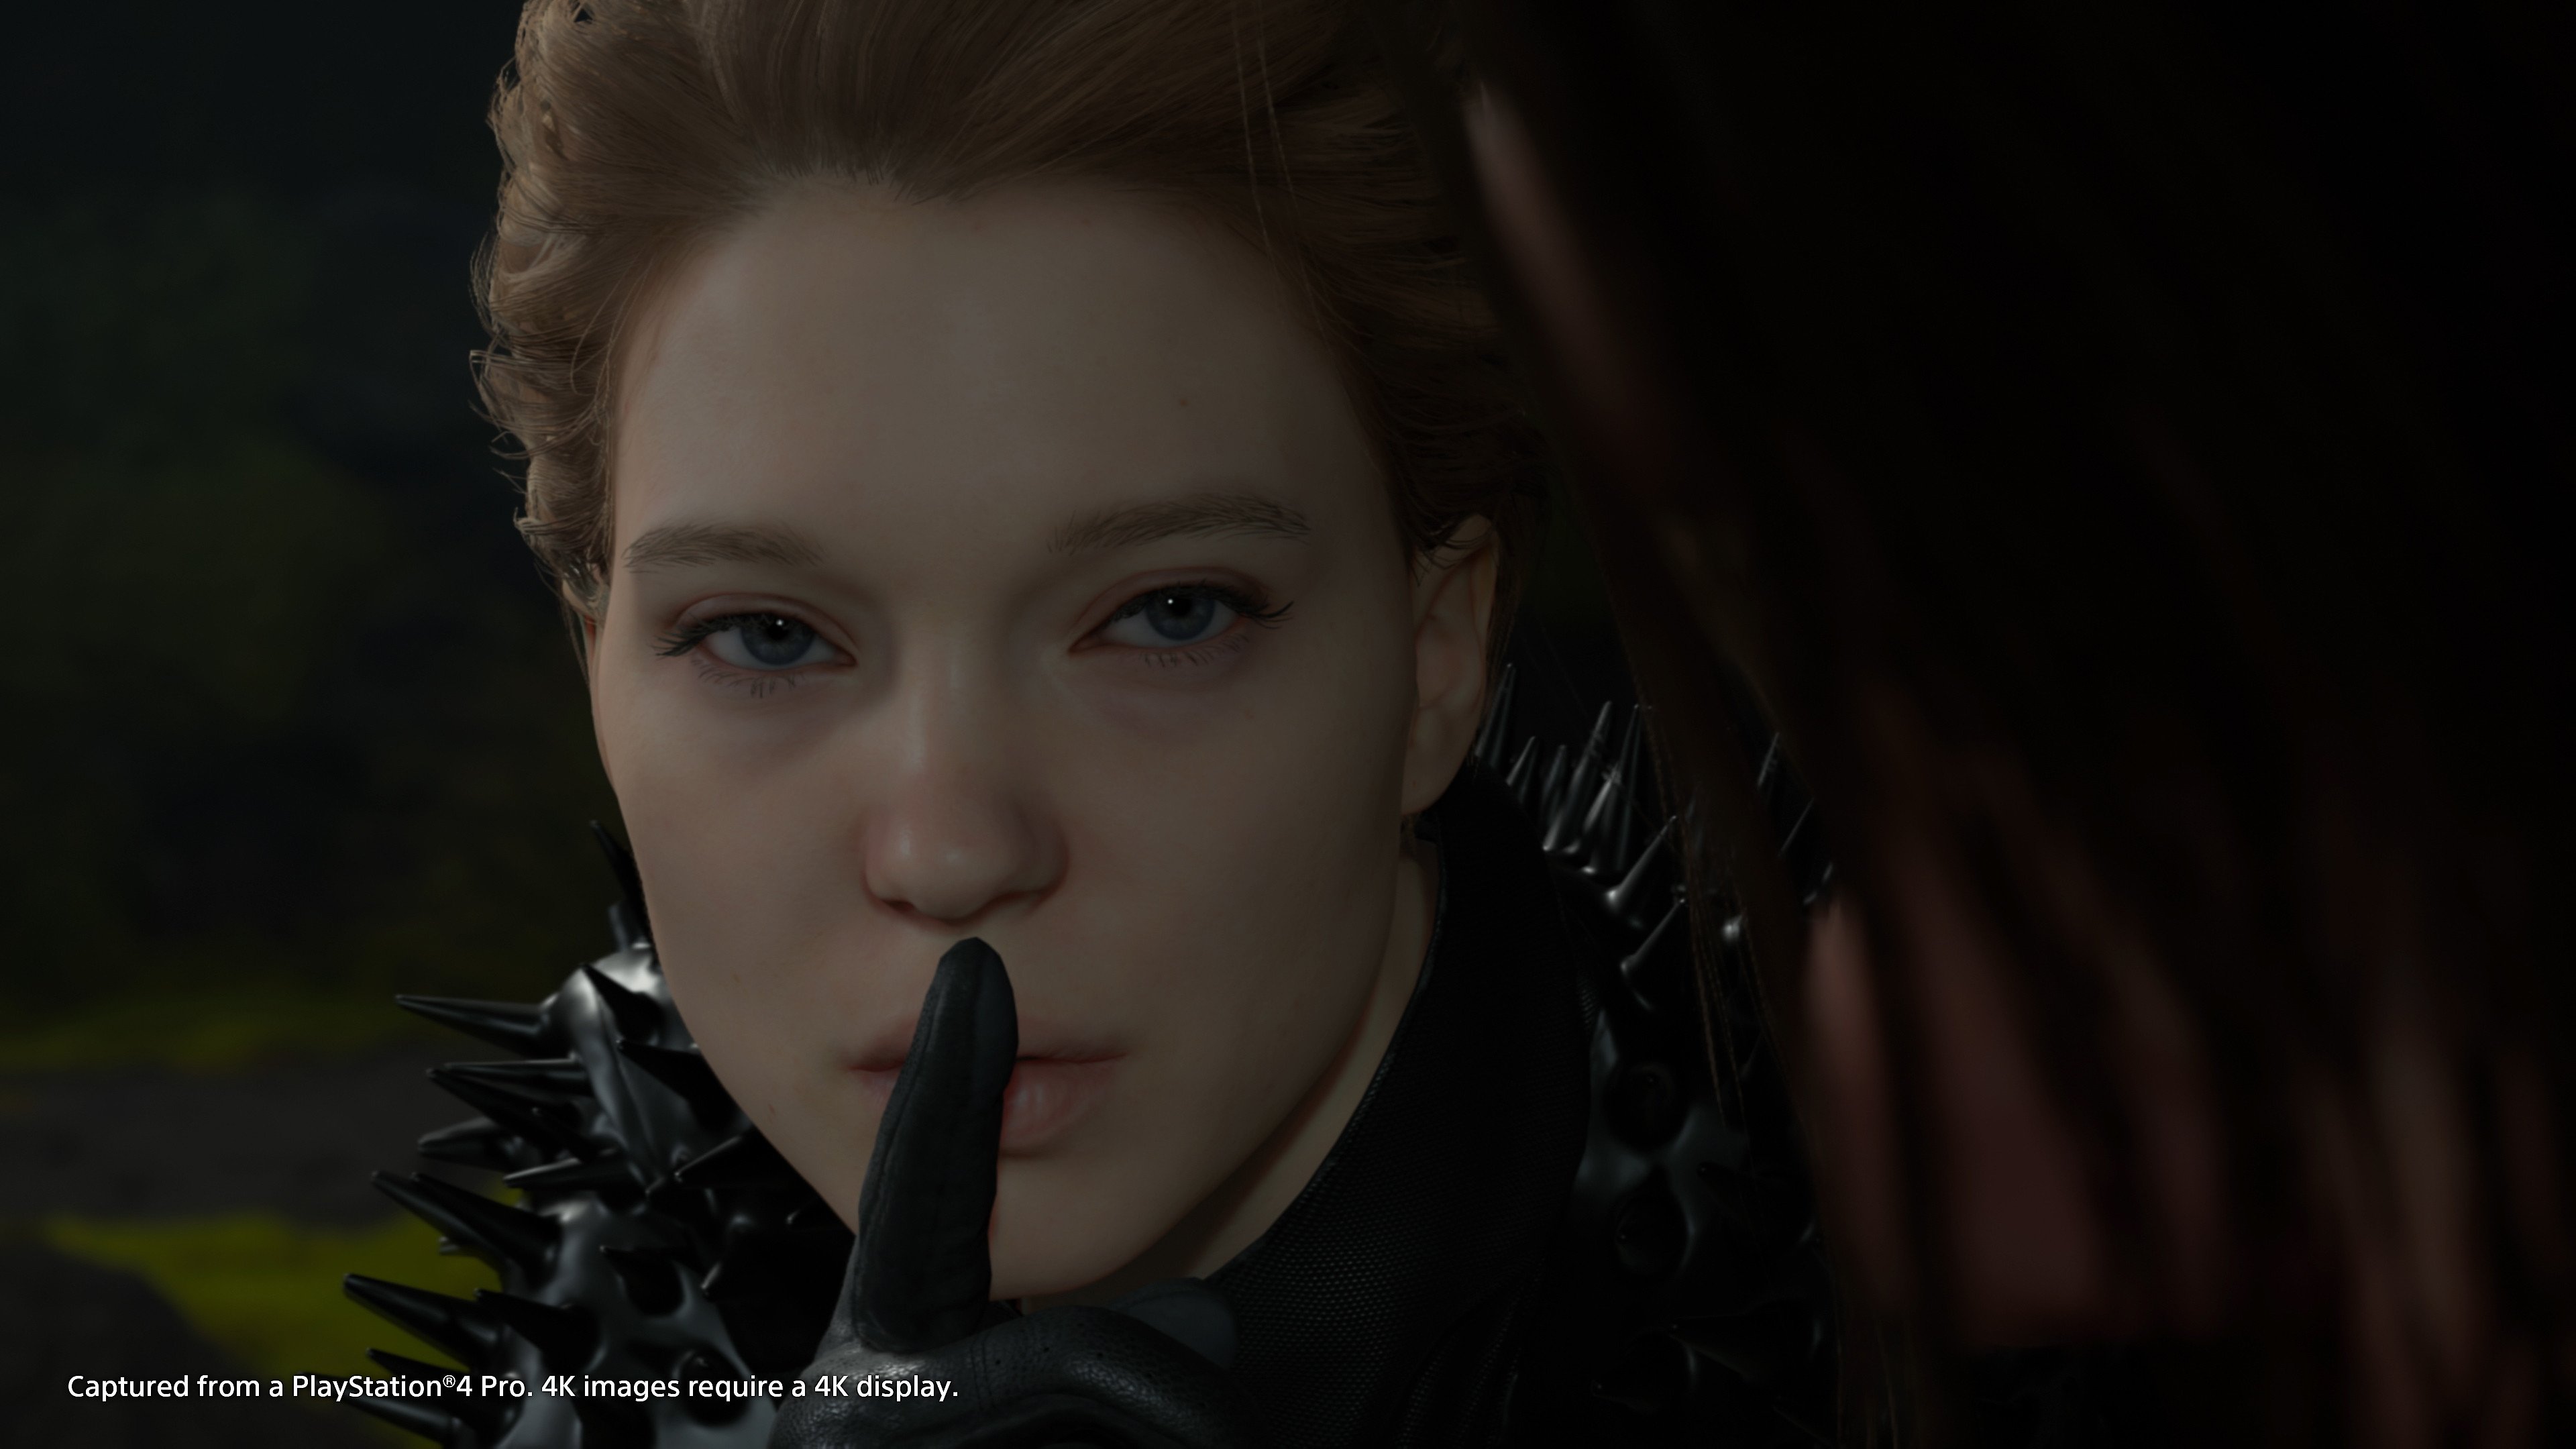 Death Stranding Cast Update: Why Emma Stone Could Join 